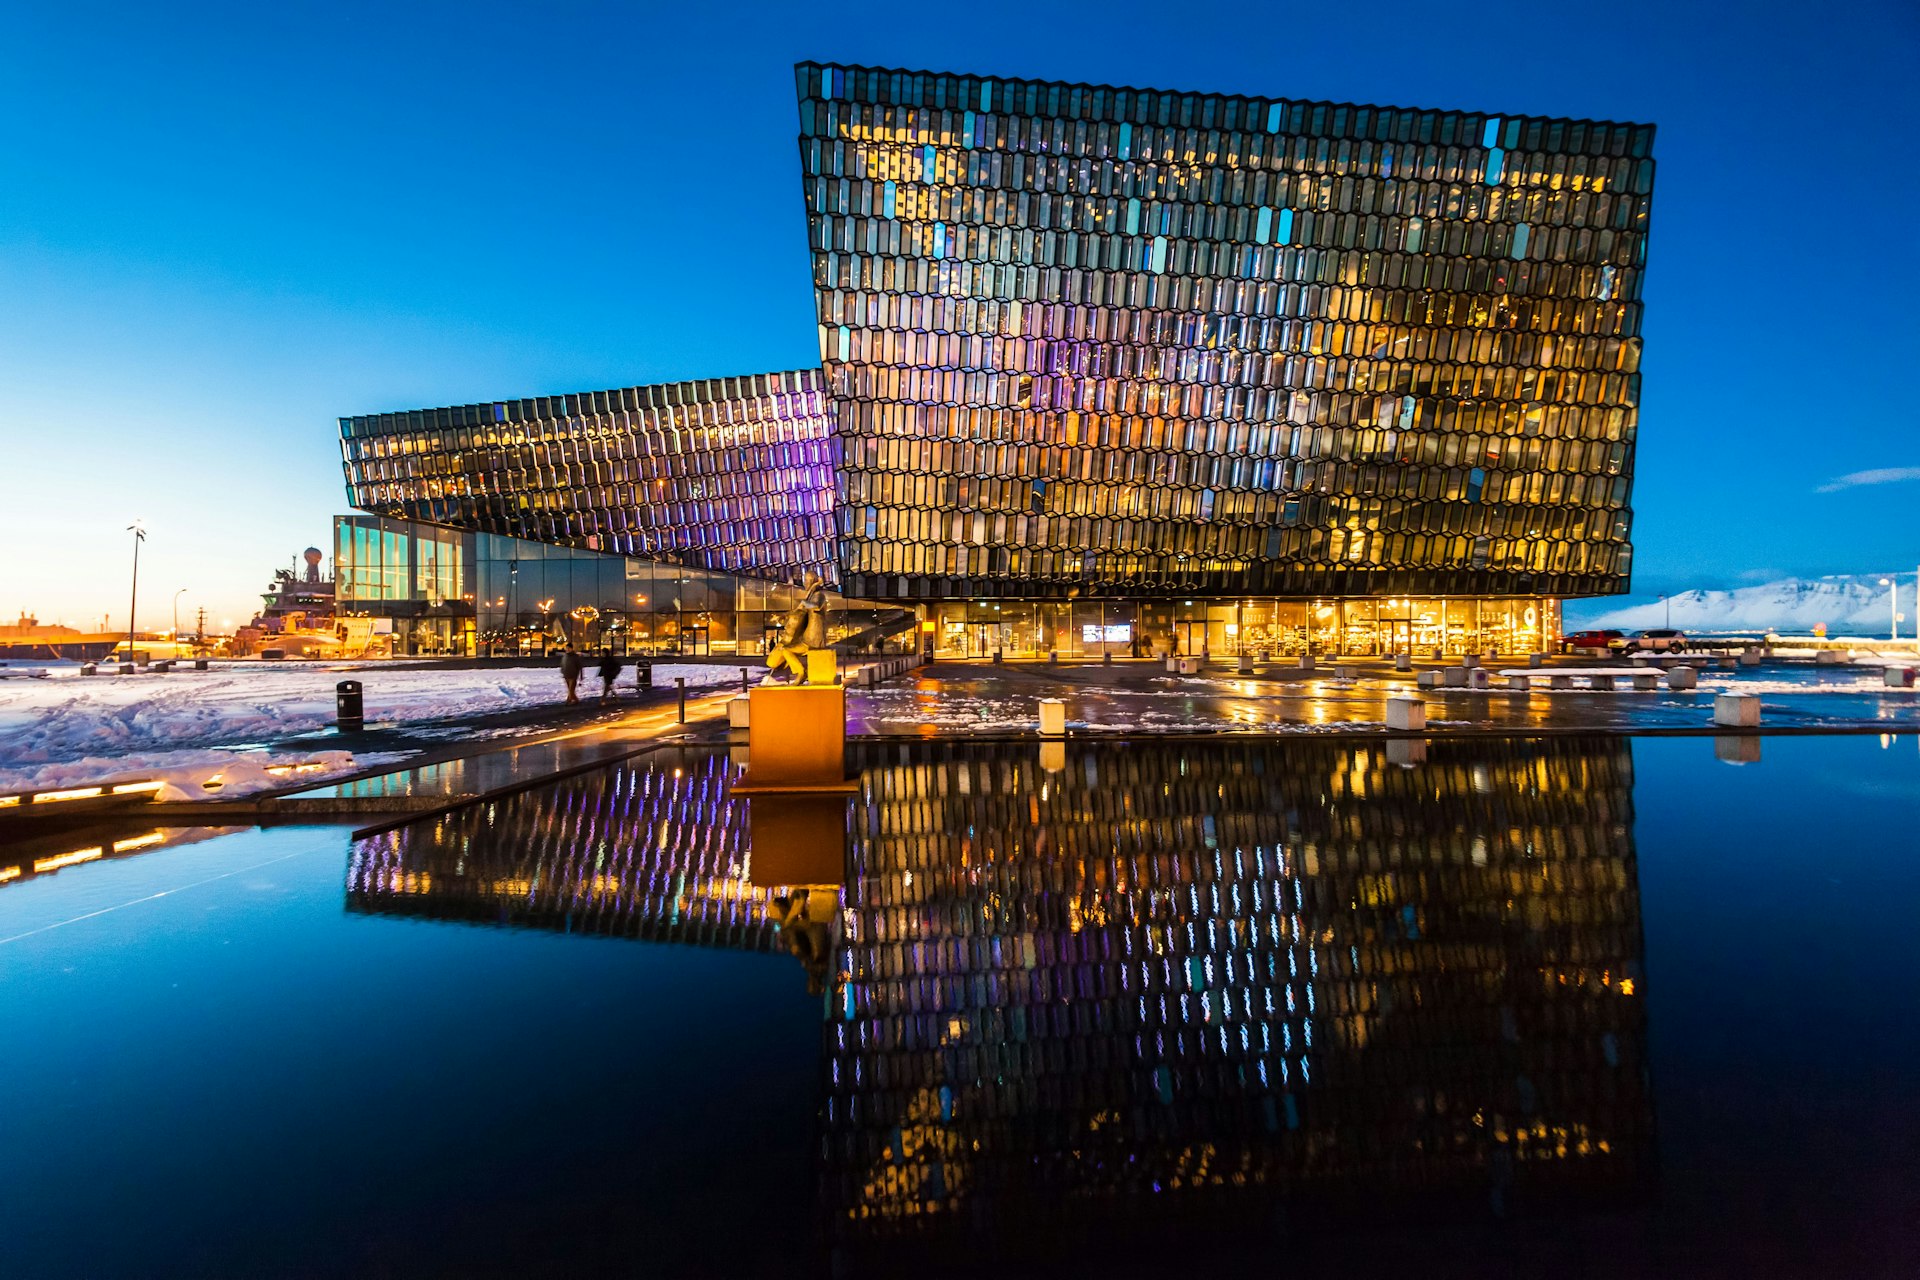 Exterior of the Harpa Concert Hall illuminated during twilight in Reykjavik Iceland